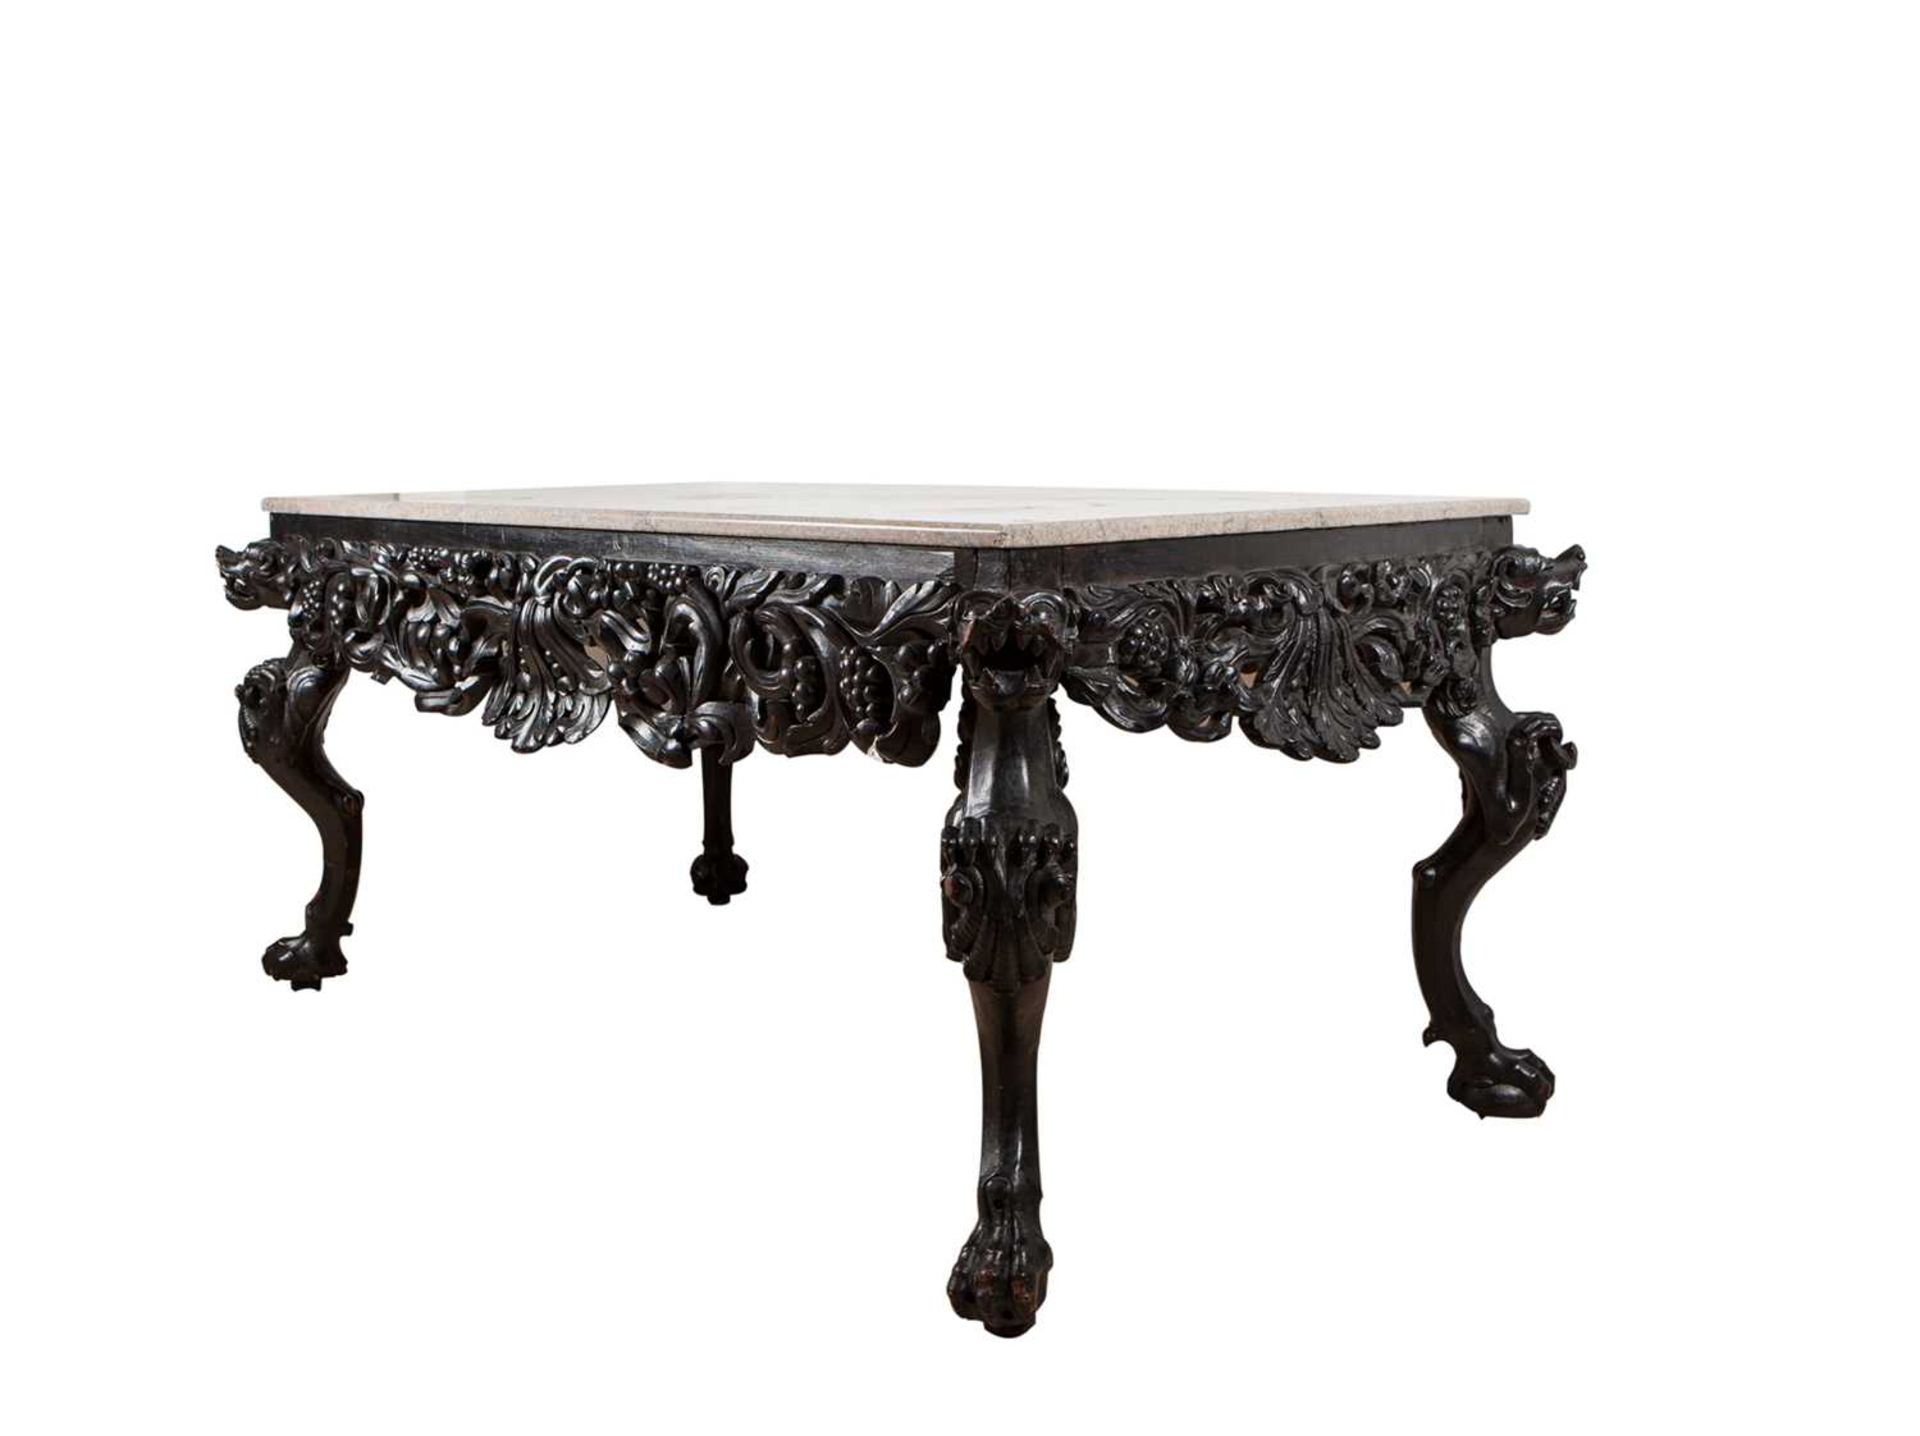 A 19TH CENTURY GEORGE II STYLE CARVED WOOD AND MARBLE TOPPED HALL TABLE - Image 2 of 2